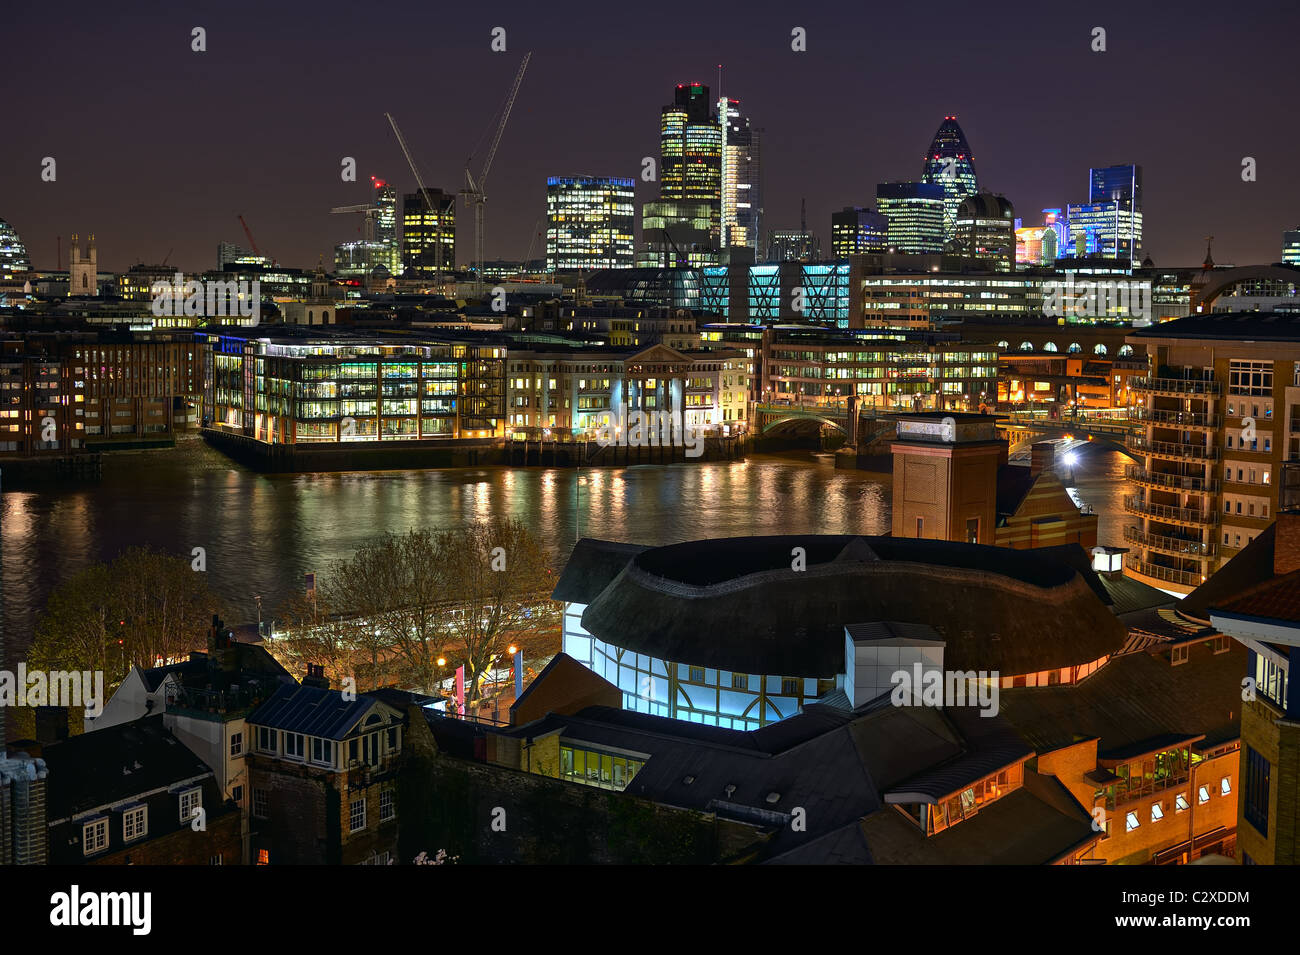 Looking over Shakespeare's Globe Theatre and the River Thames towards the City of London, England, UK, Europe, at night Stock Photo